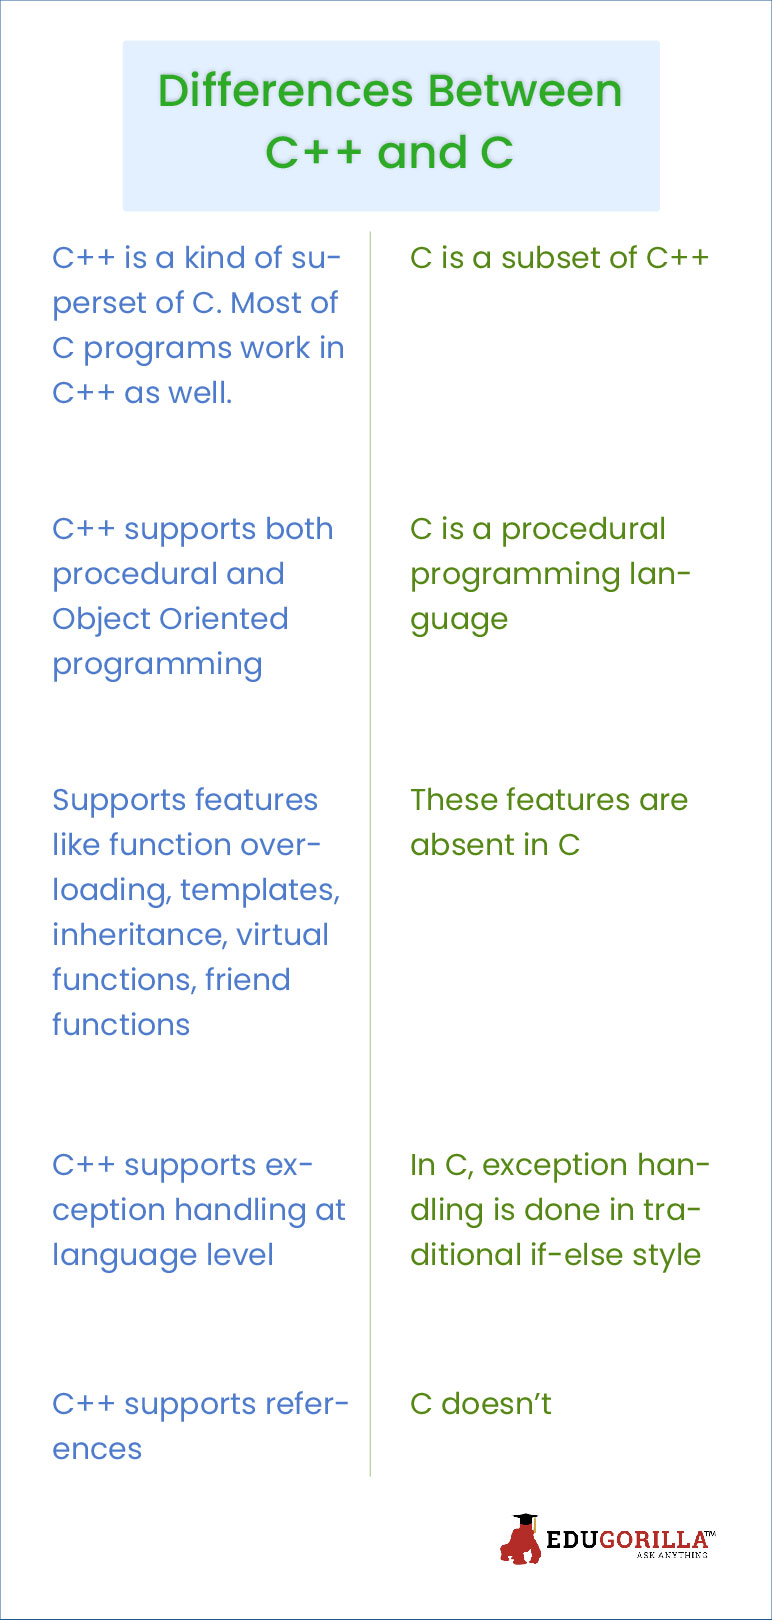 Differences Between C++ and C